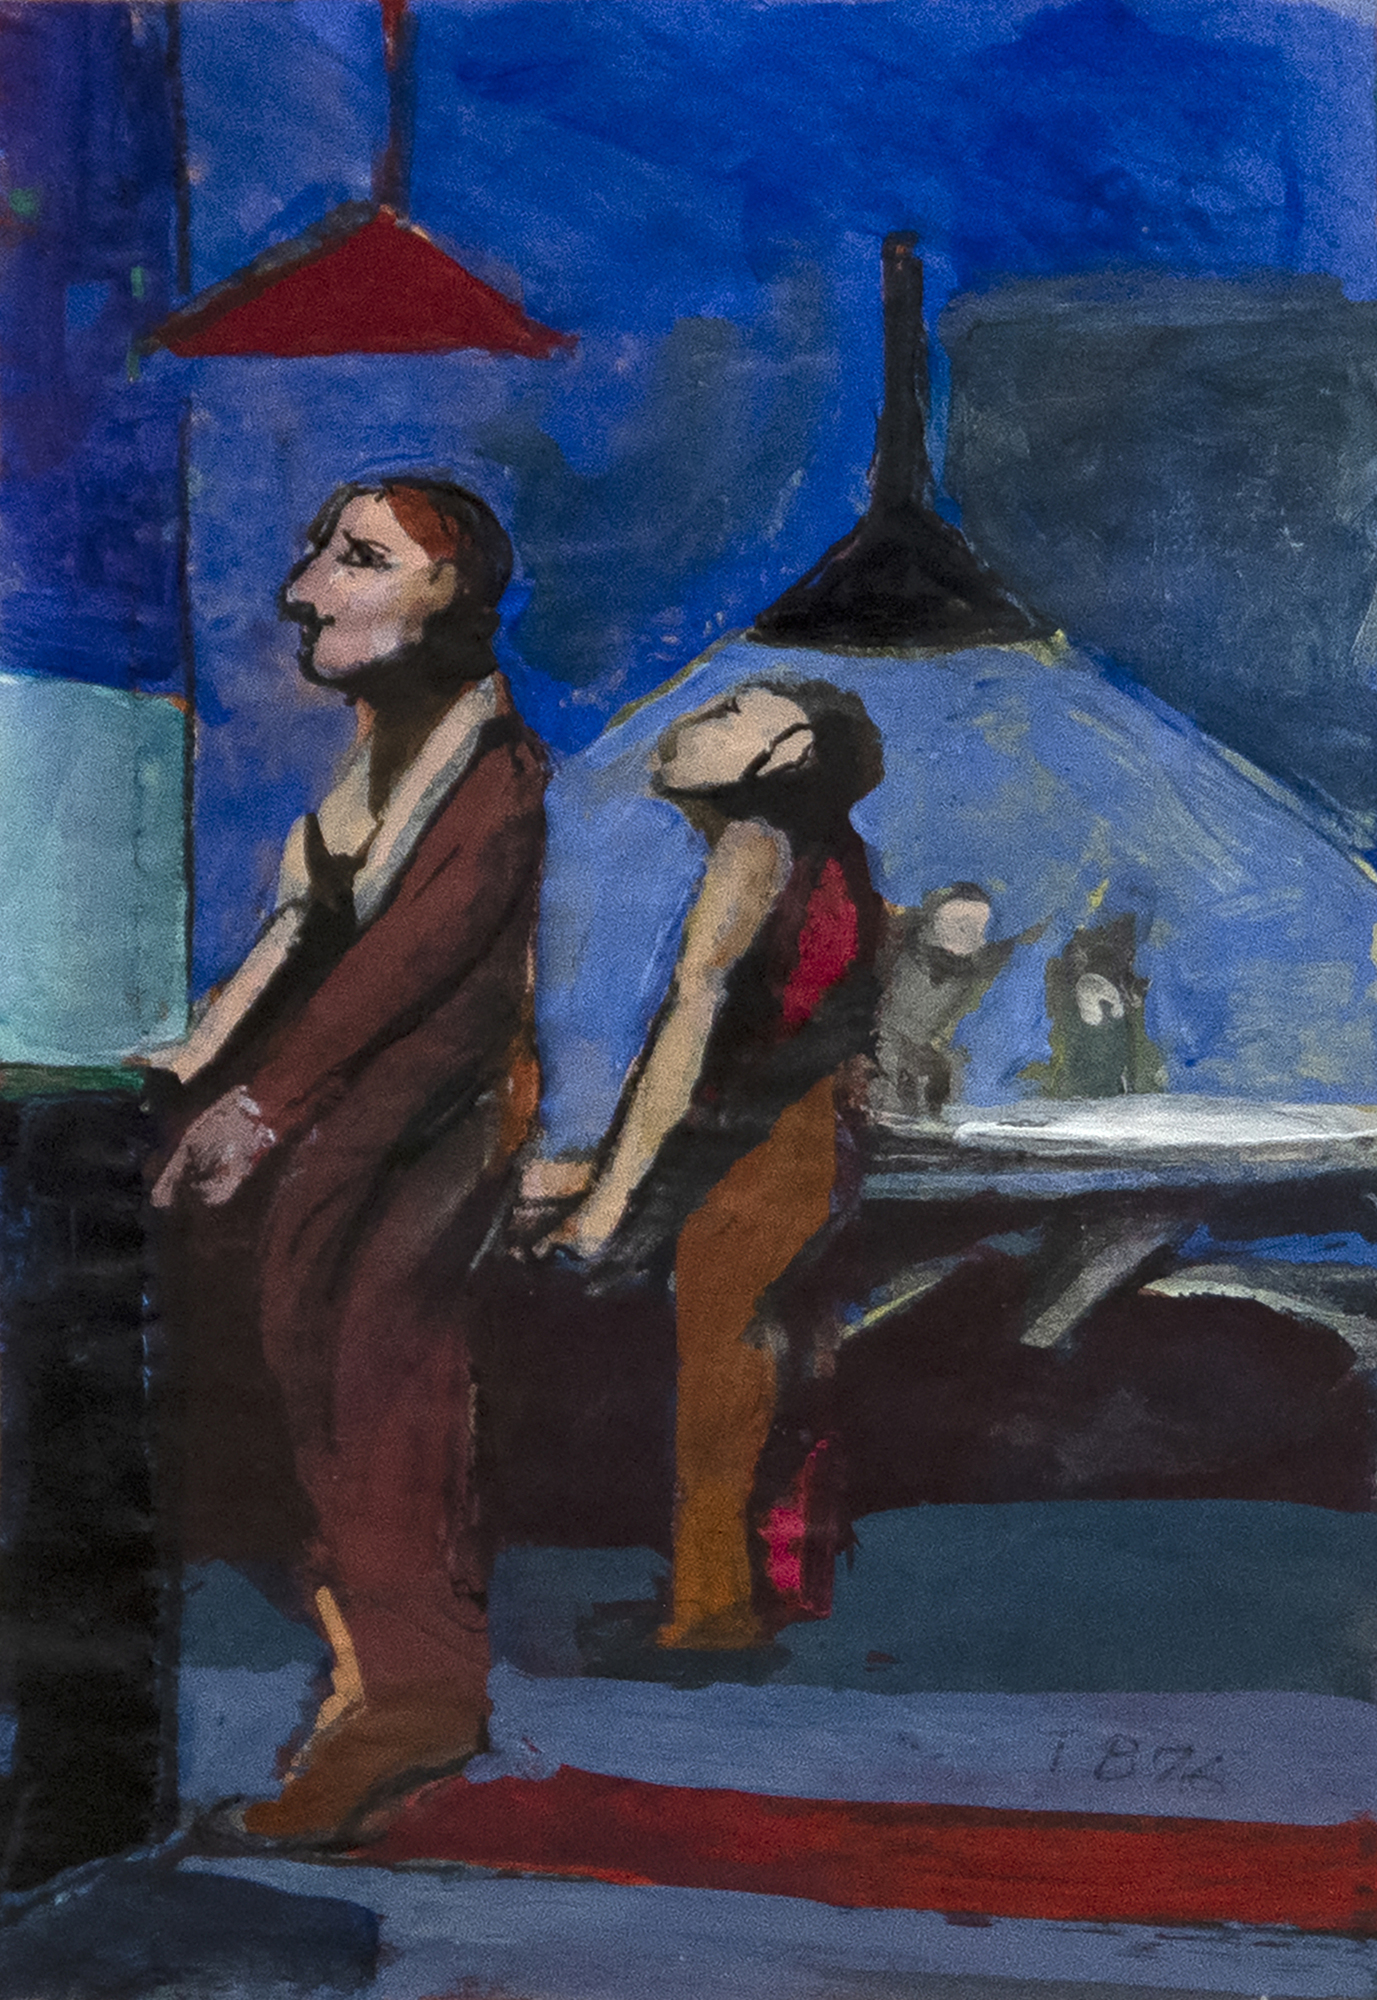 WILLIAM THEOPHILUS BROWN - Two Figures in Bar (Fun & Games) - gouache - 5 3/4 x 4 in.